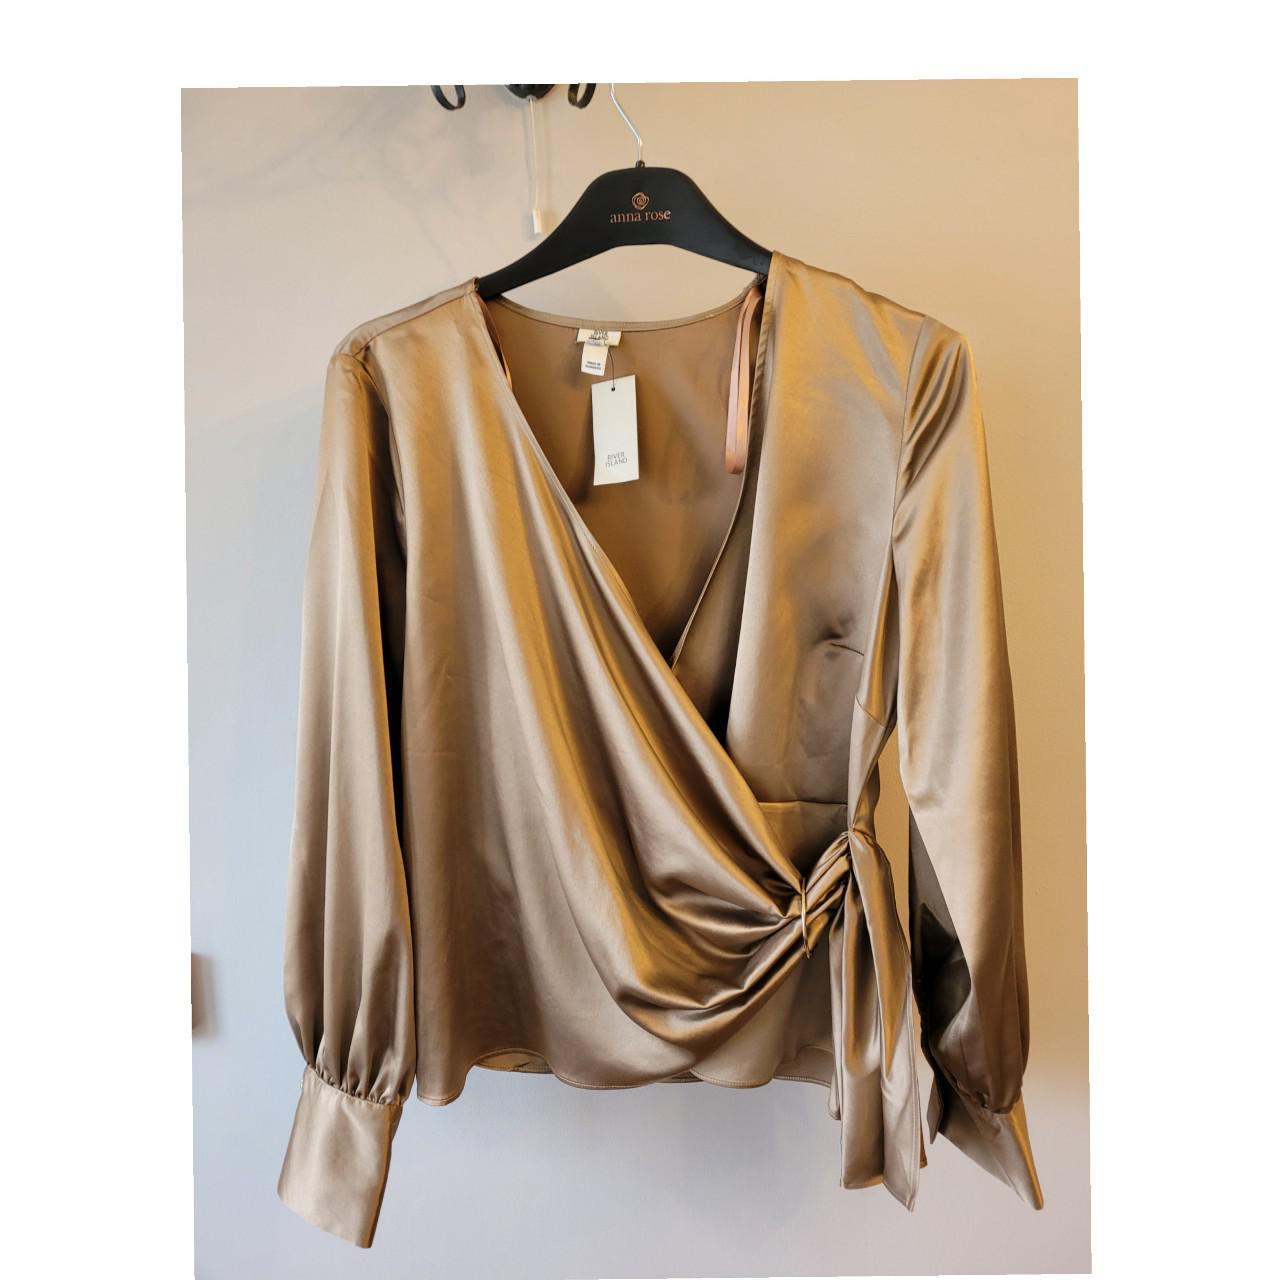 River Island Women's Tan and Gold Blouse